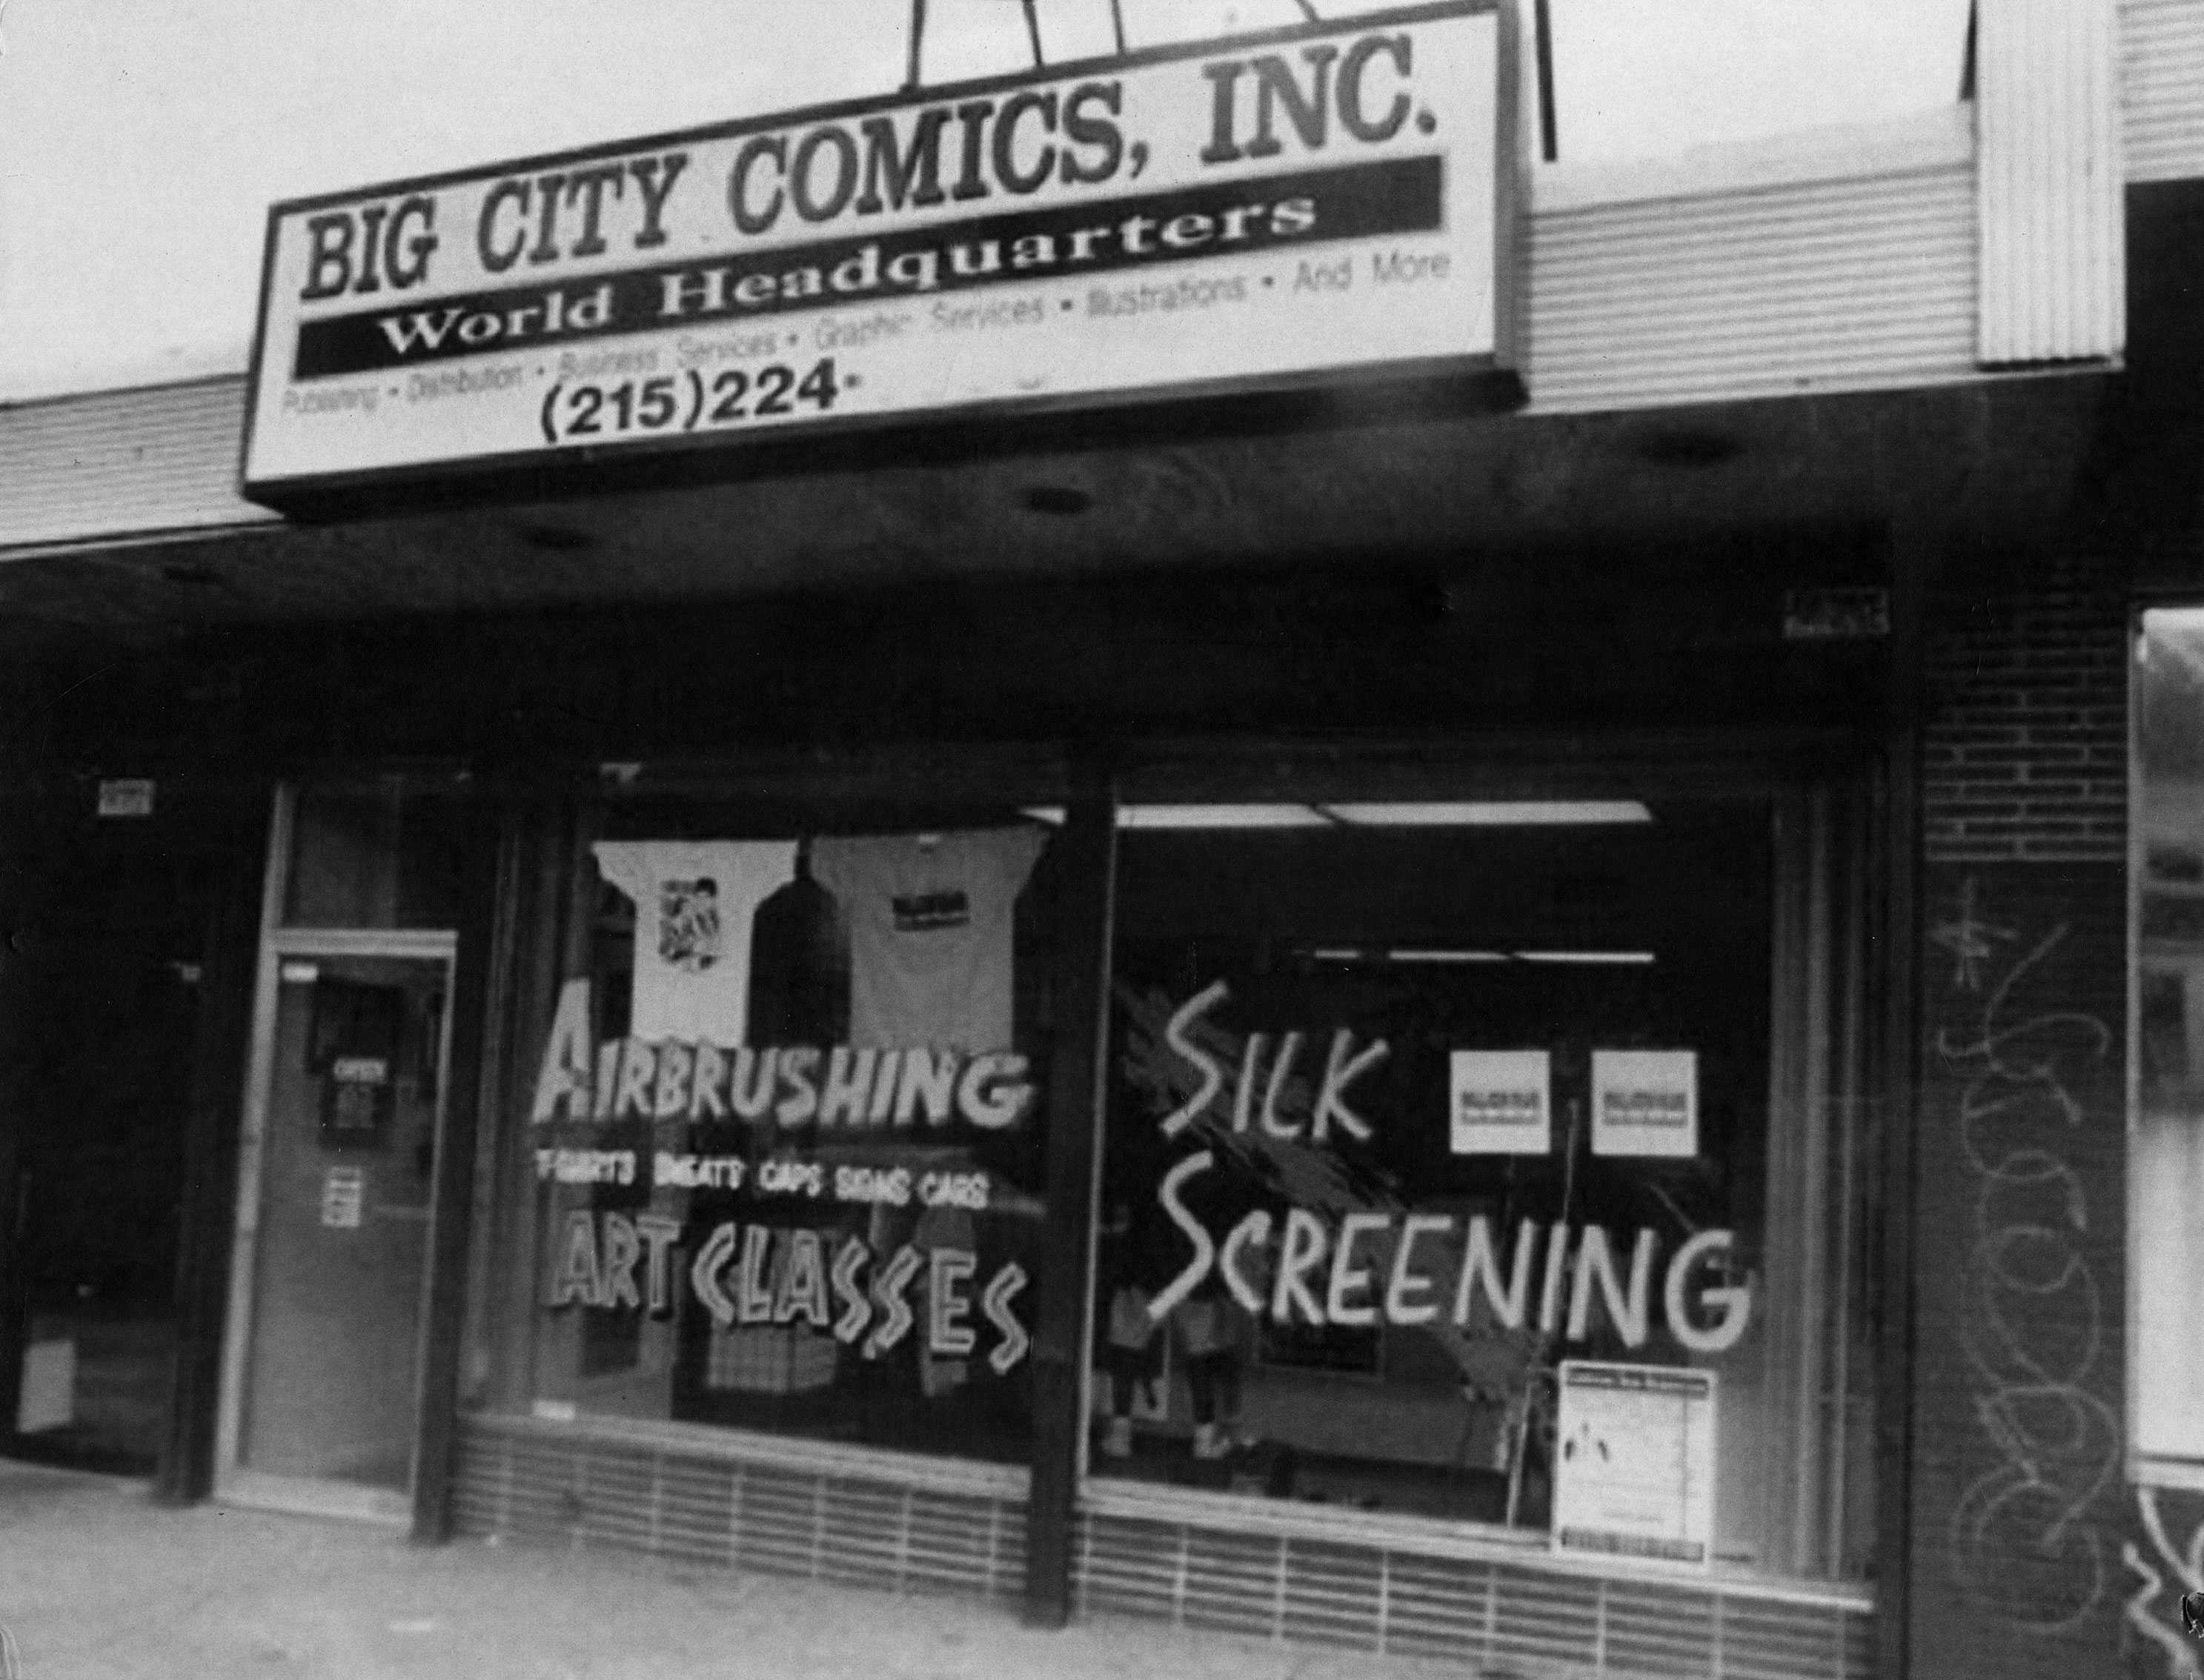 A black and white photograph of the exterior of Big City Comics.